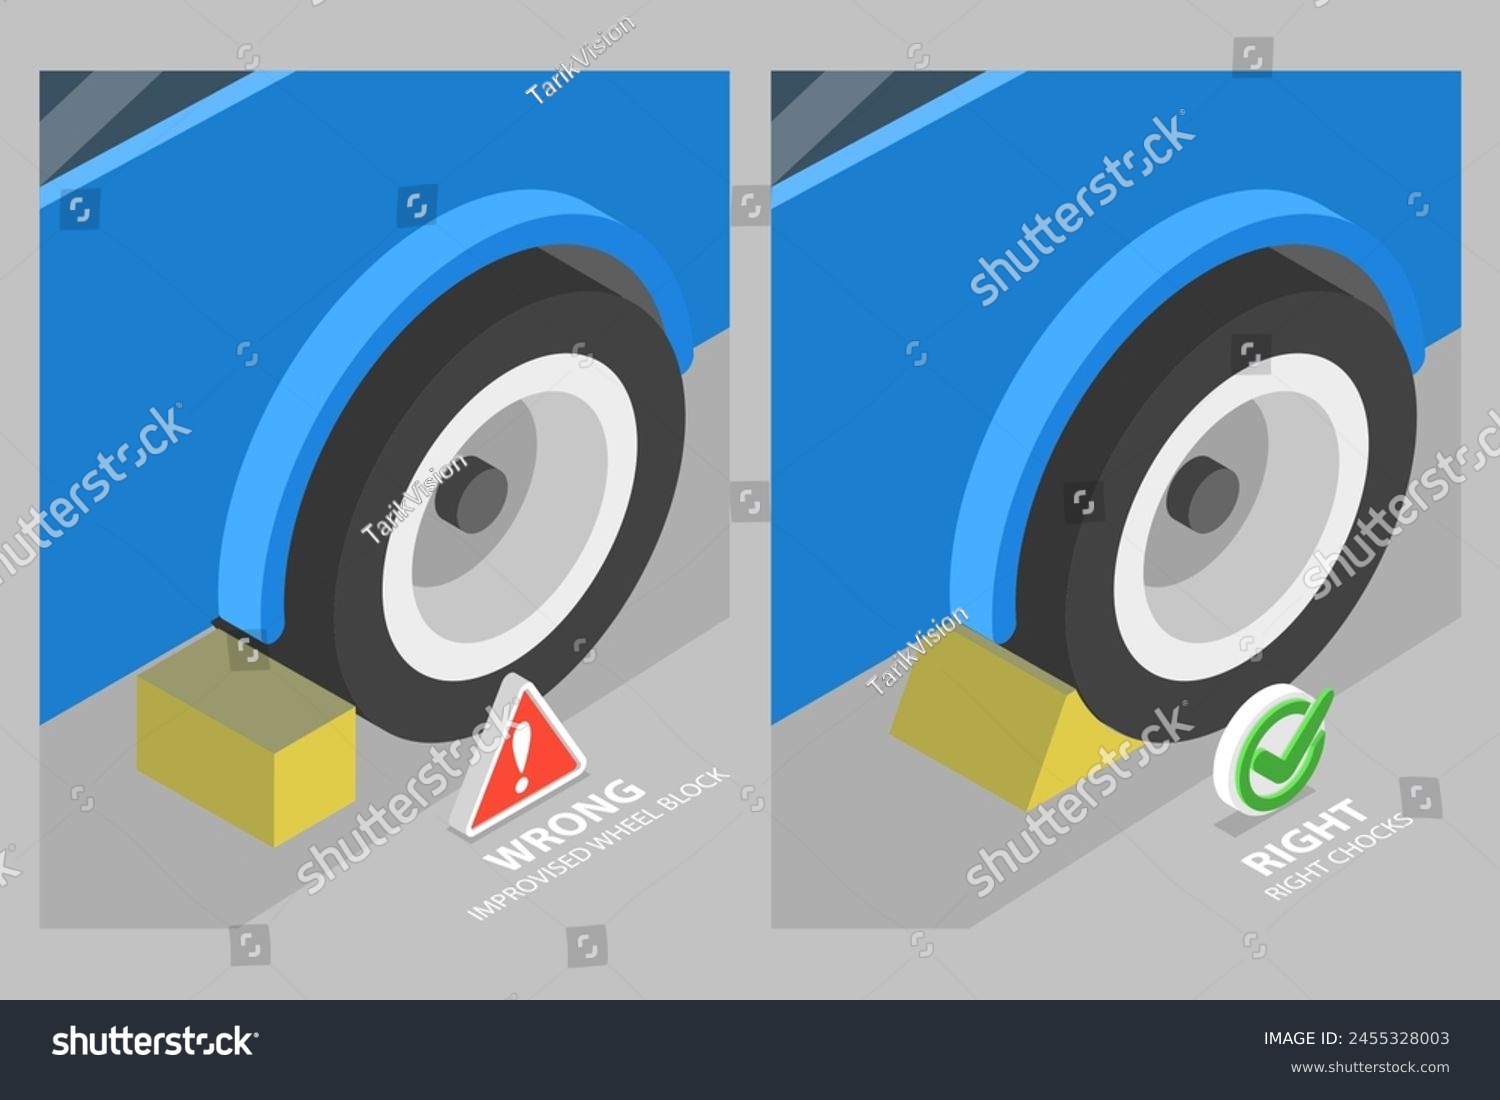 SVG of 3D Isometric Flat Vector Illustration of Proper Chocking Placment, Driving Rules And Tips svg